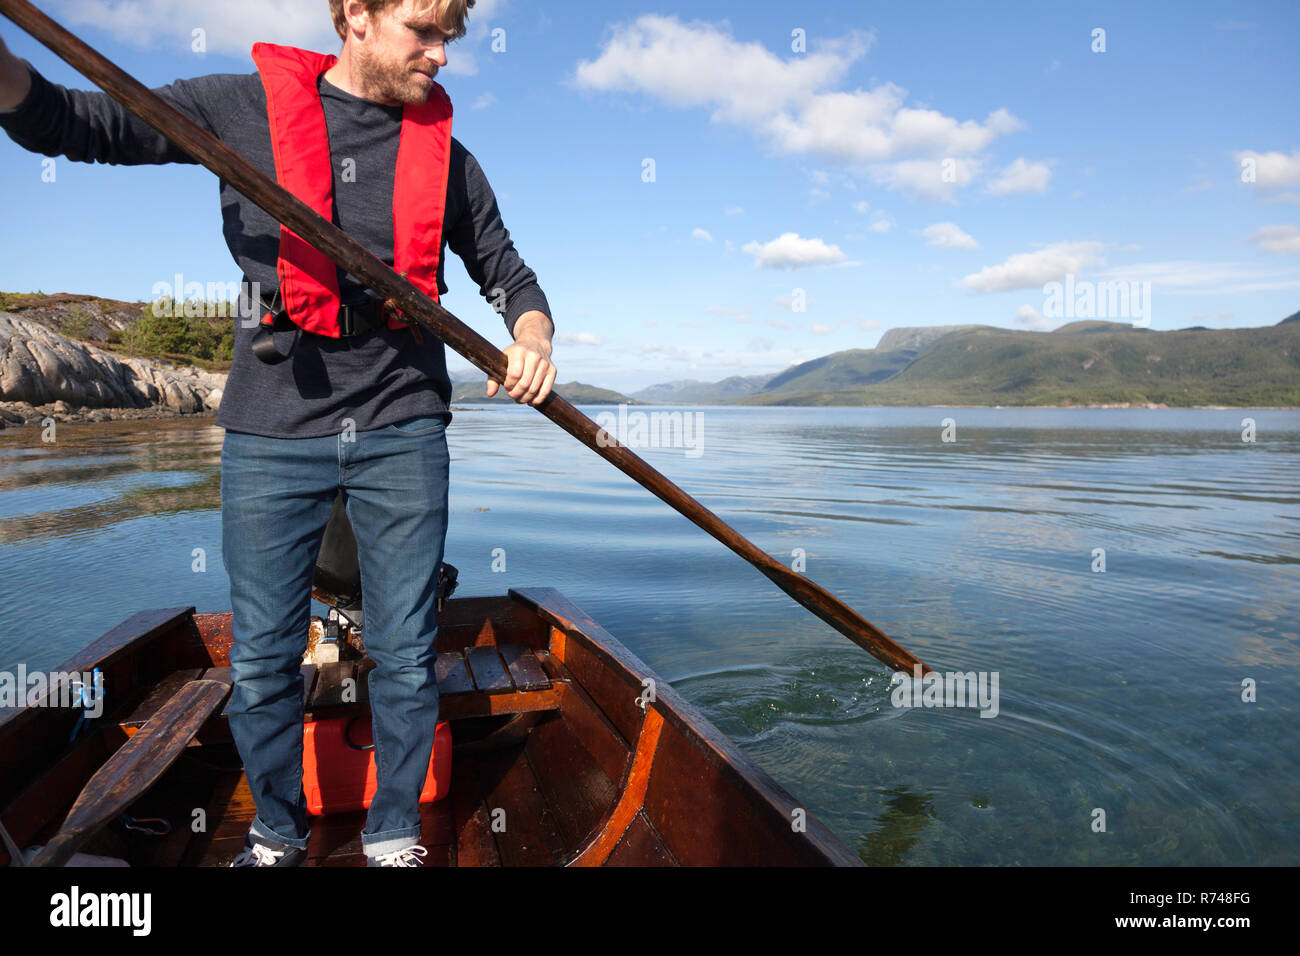 Mature man standing up to use oar in rowing boat, Aure, More og Romsdal, Norway Stock Photo